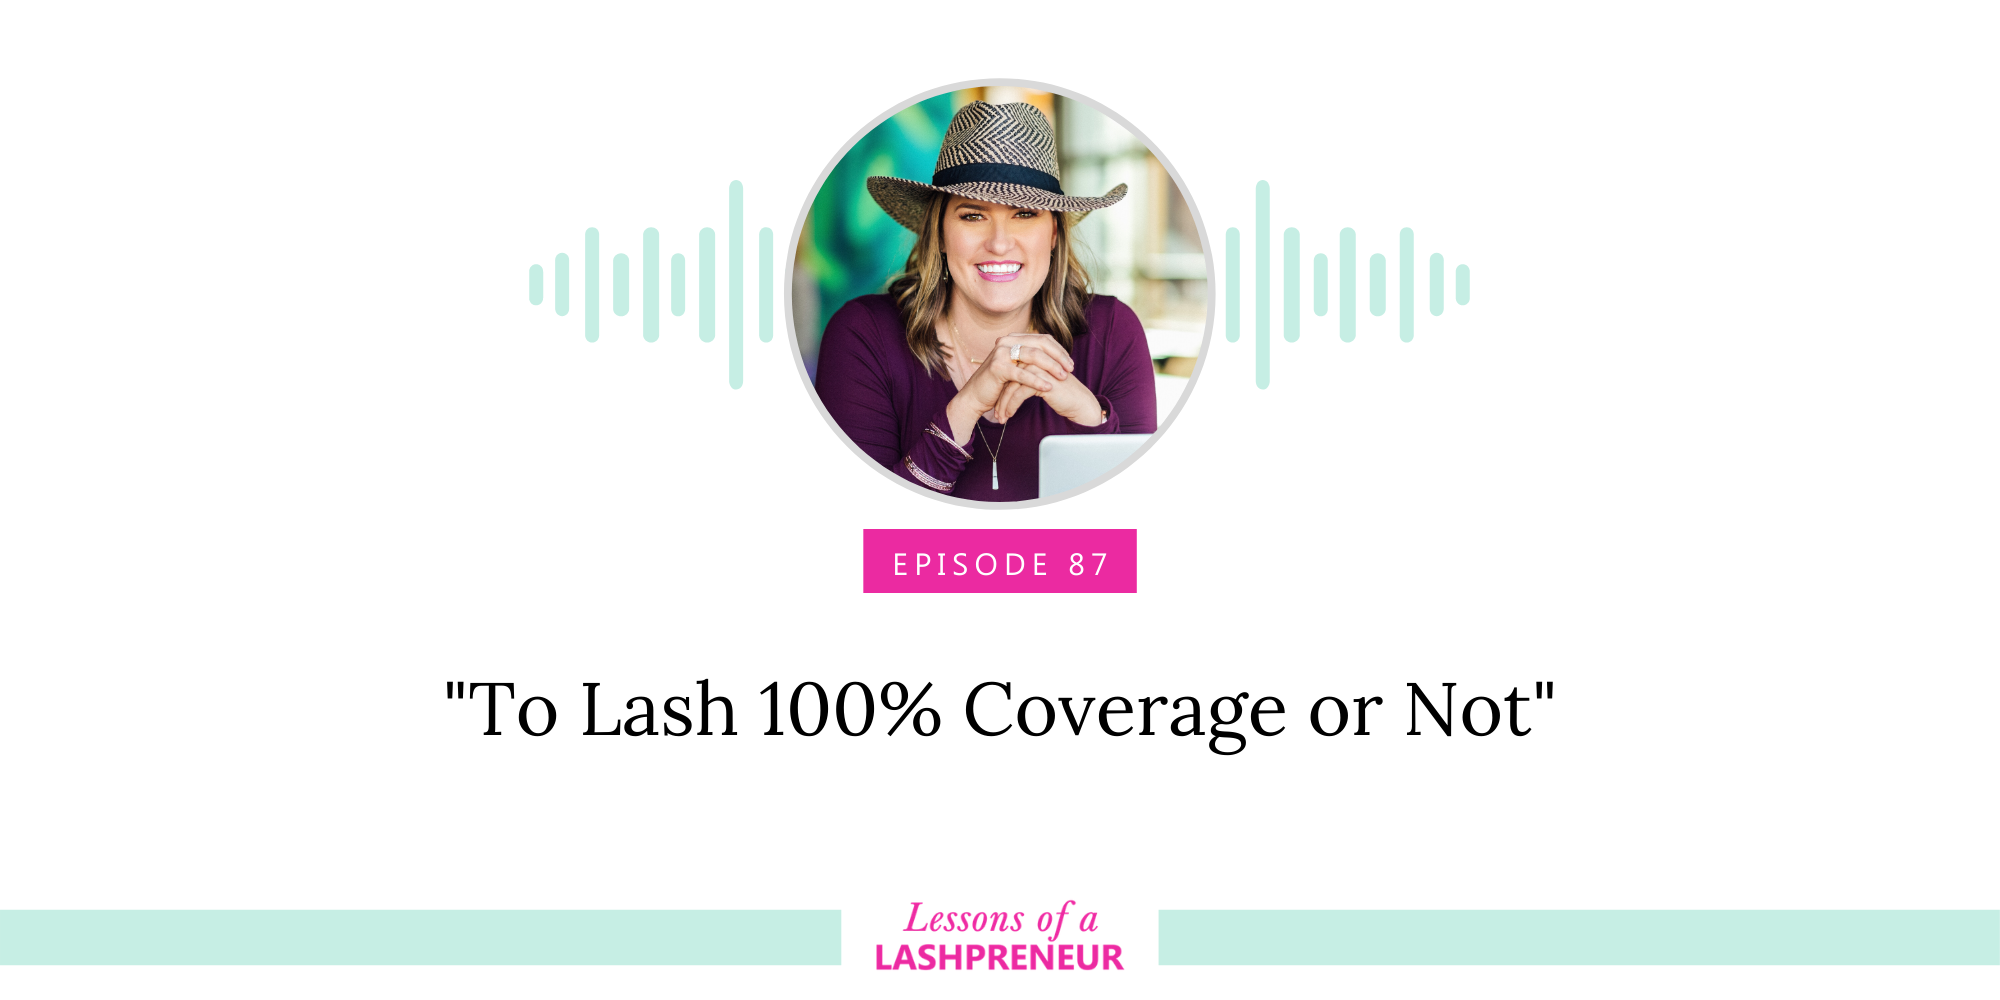 To Lash 100% Coverage or Not